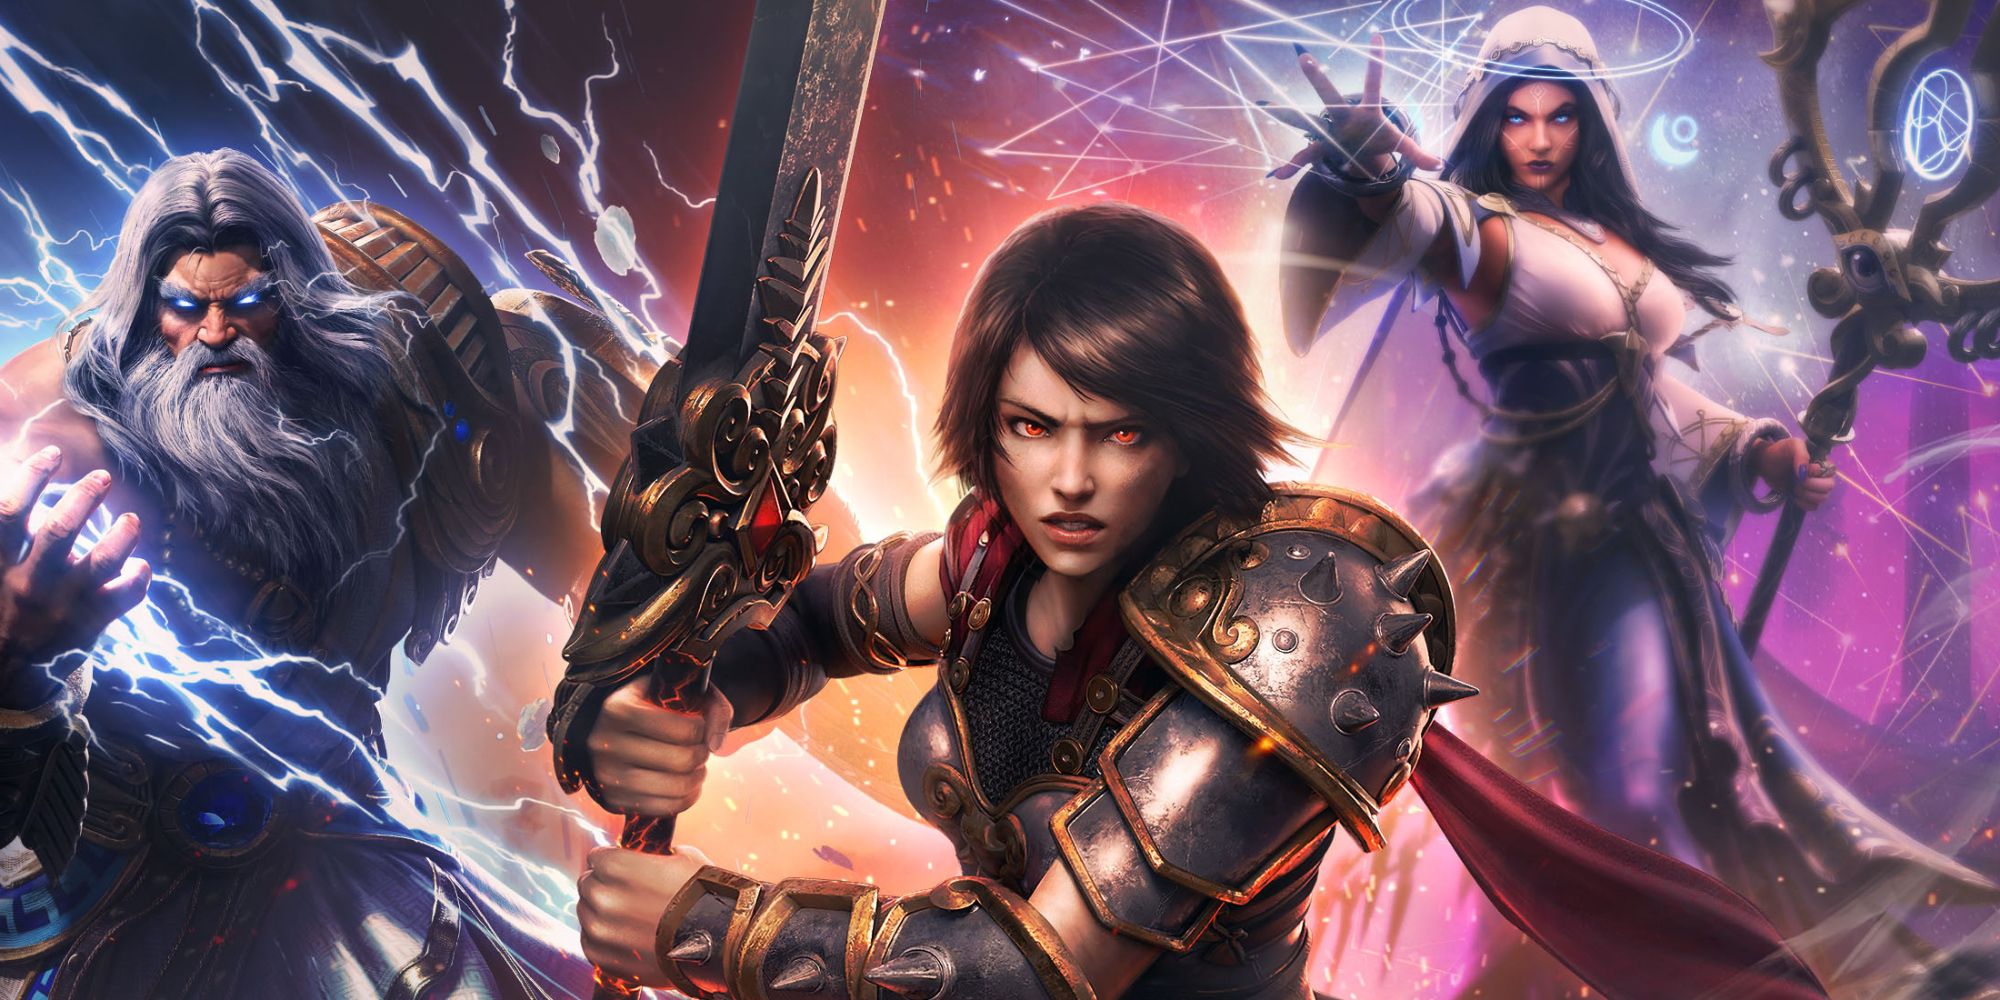 Zeus, Bellona, and Hecate in the announcement image for Smite 2